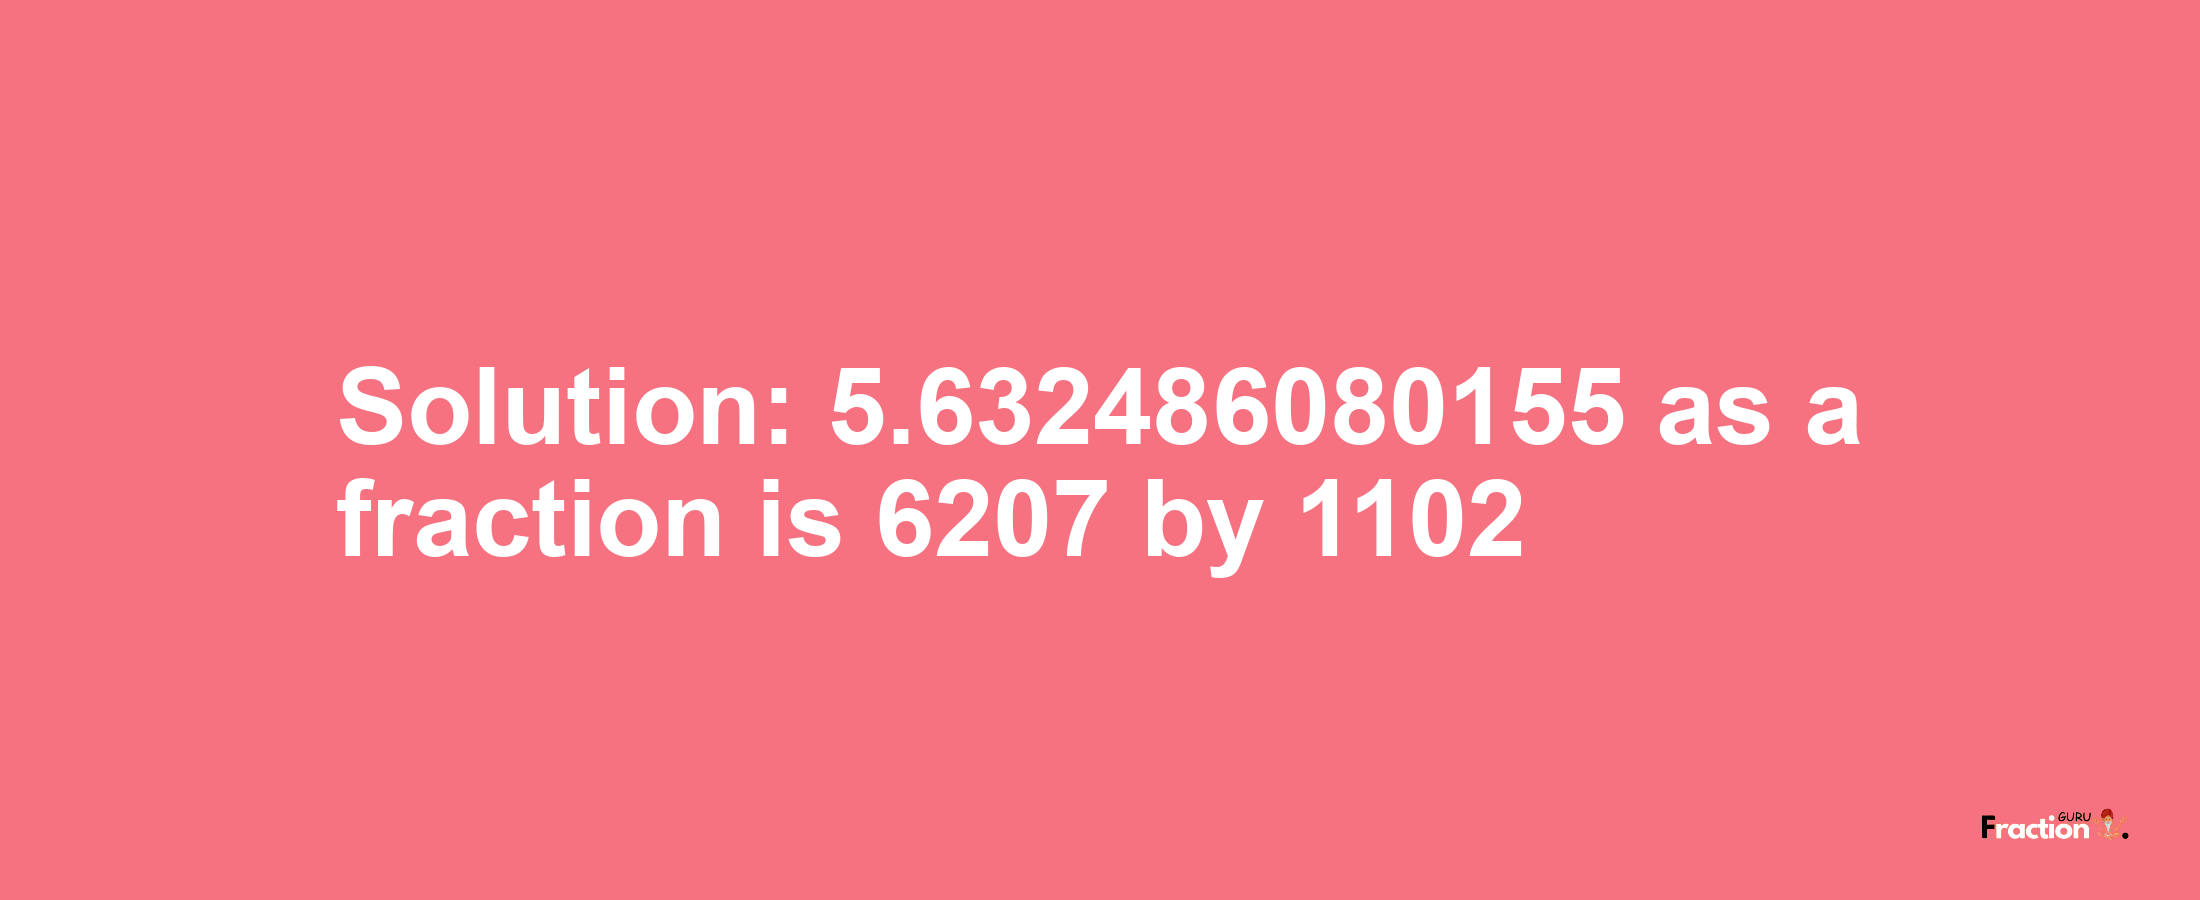 Solution:5.632486080155 as a fraction is 6207/1102